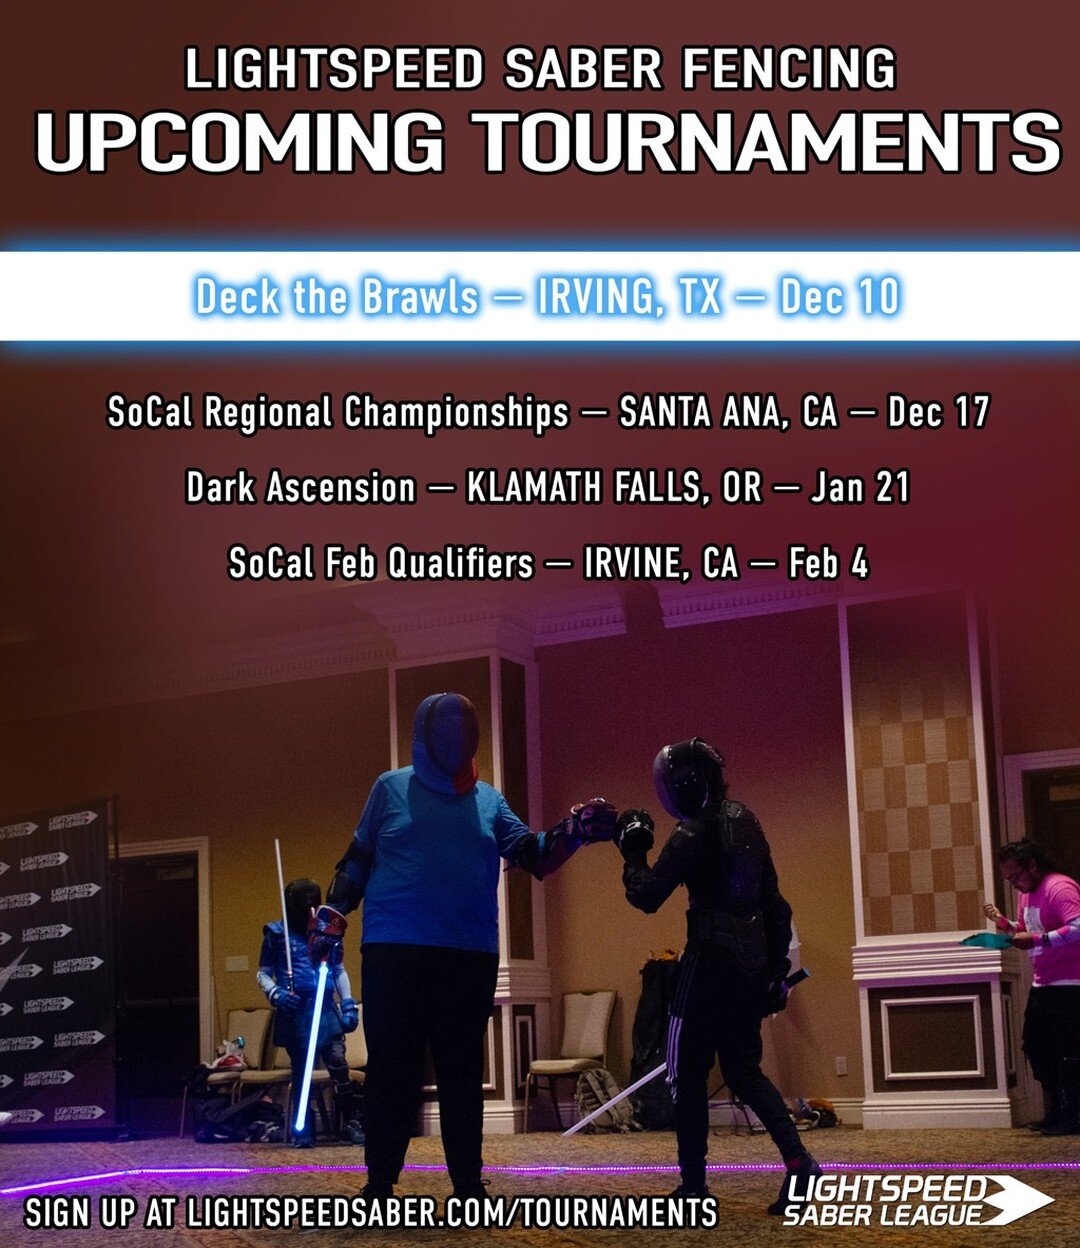 Don't miss the final tournaments of the year!! Lightspeed Saber League is closing out the year strong with two final tournaments of 2022, Deck the Brawls in Texas and the Southern California Regional Championships. Which will you be attending?

Sign 